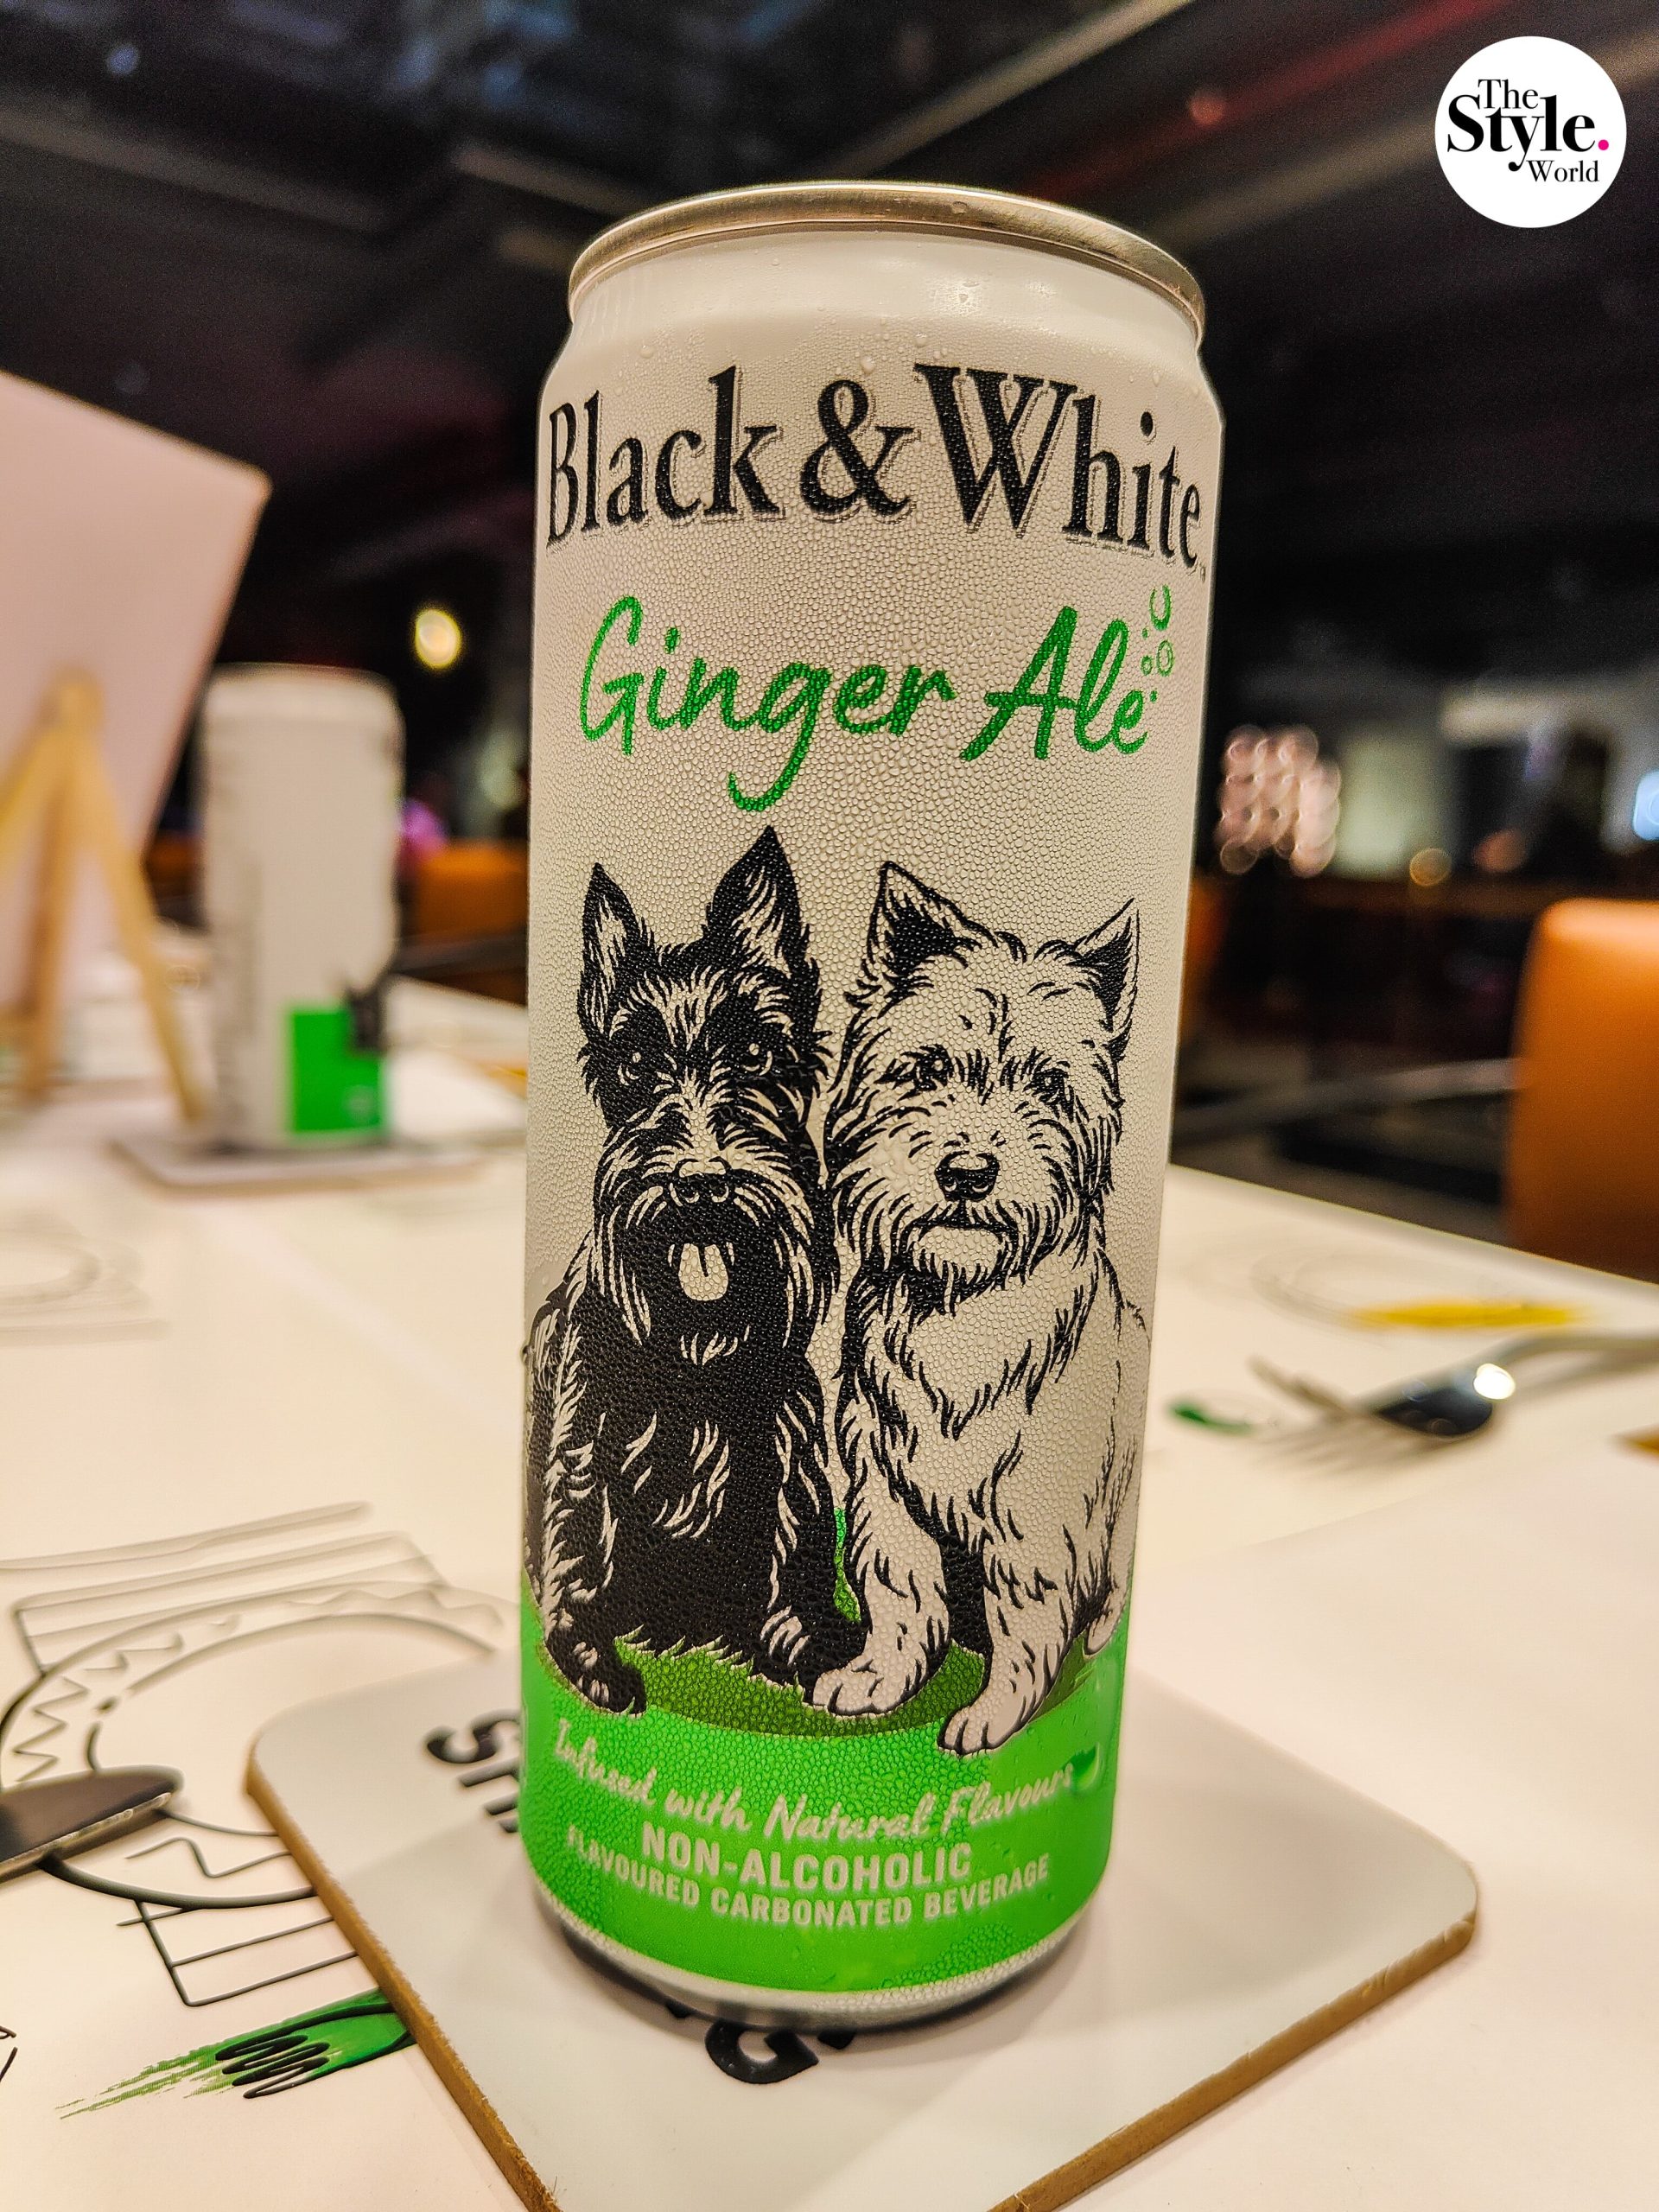 Black & White Ginger Ale's Debut Party had People Talking